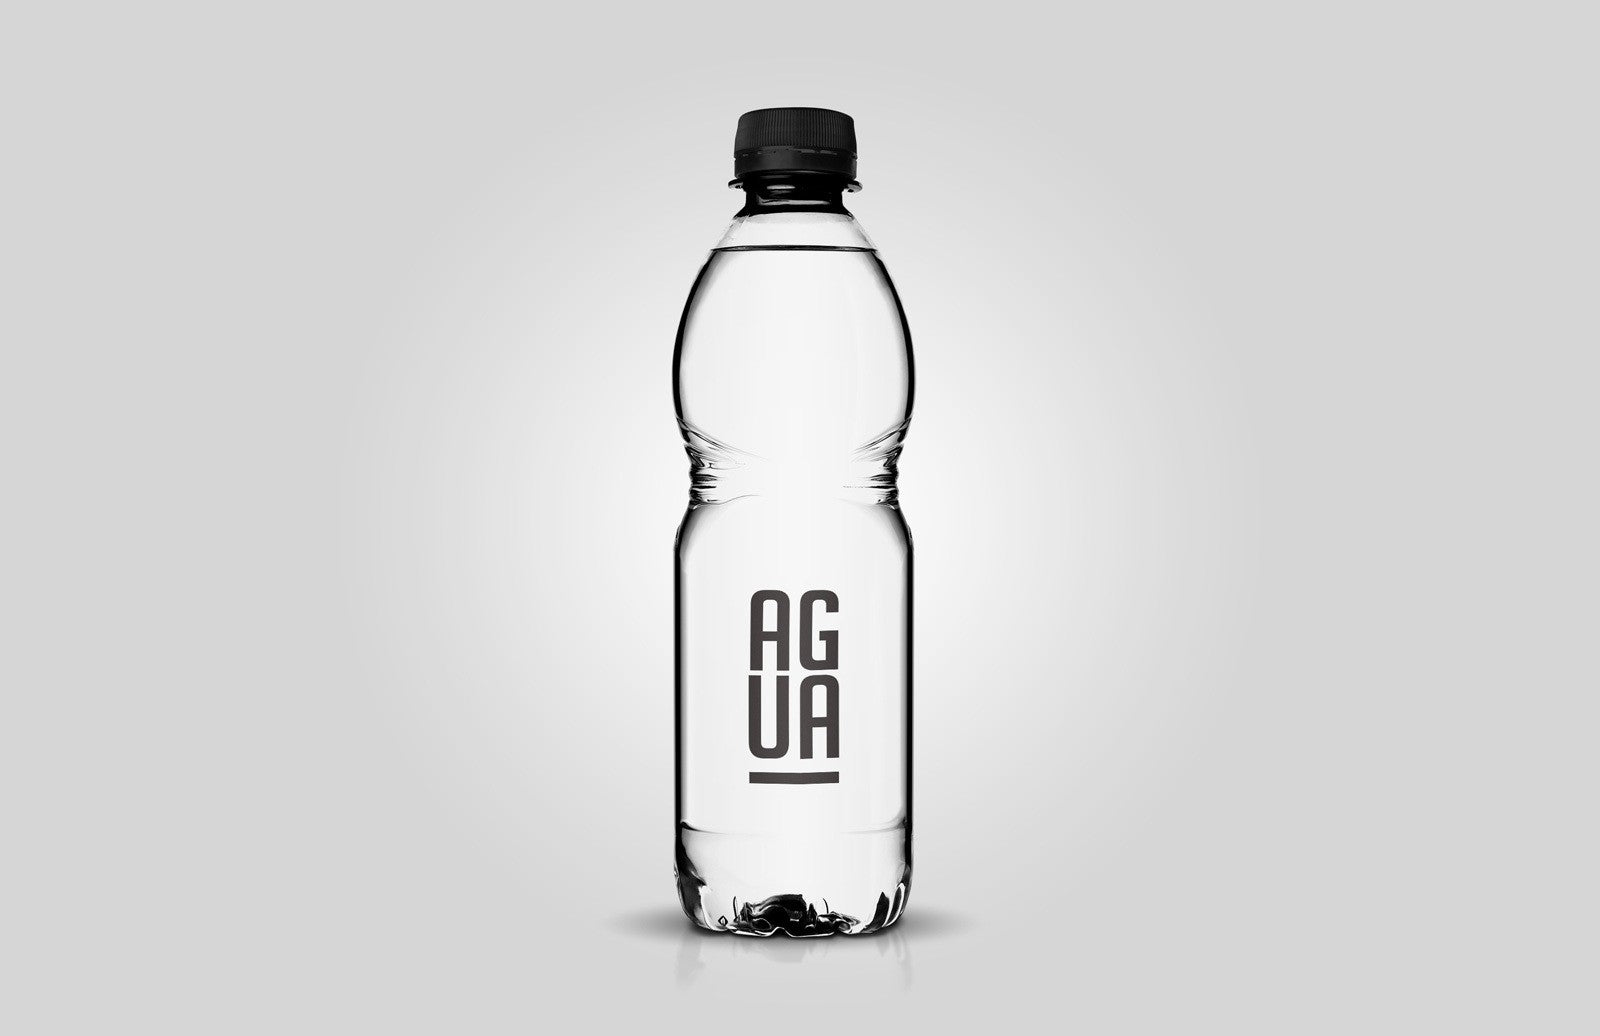 Clear Plastic Water Bottle Mockup - Free Download Images High